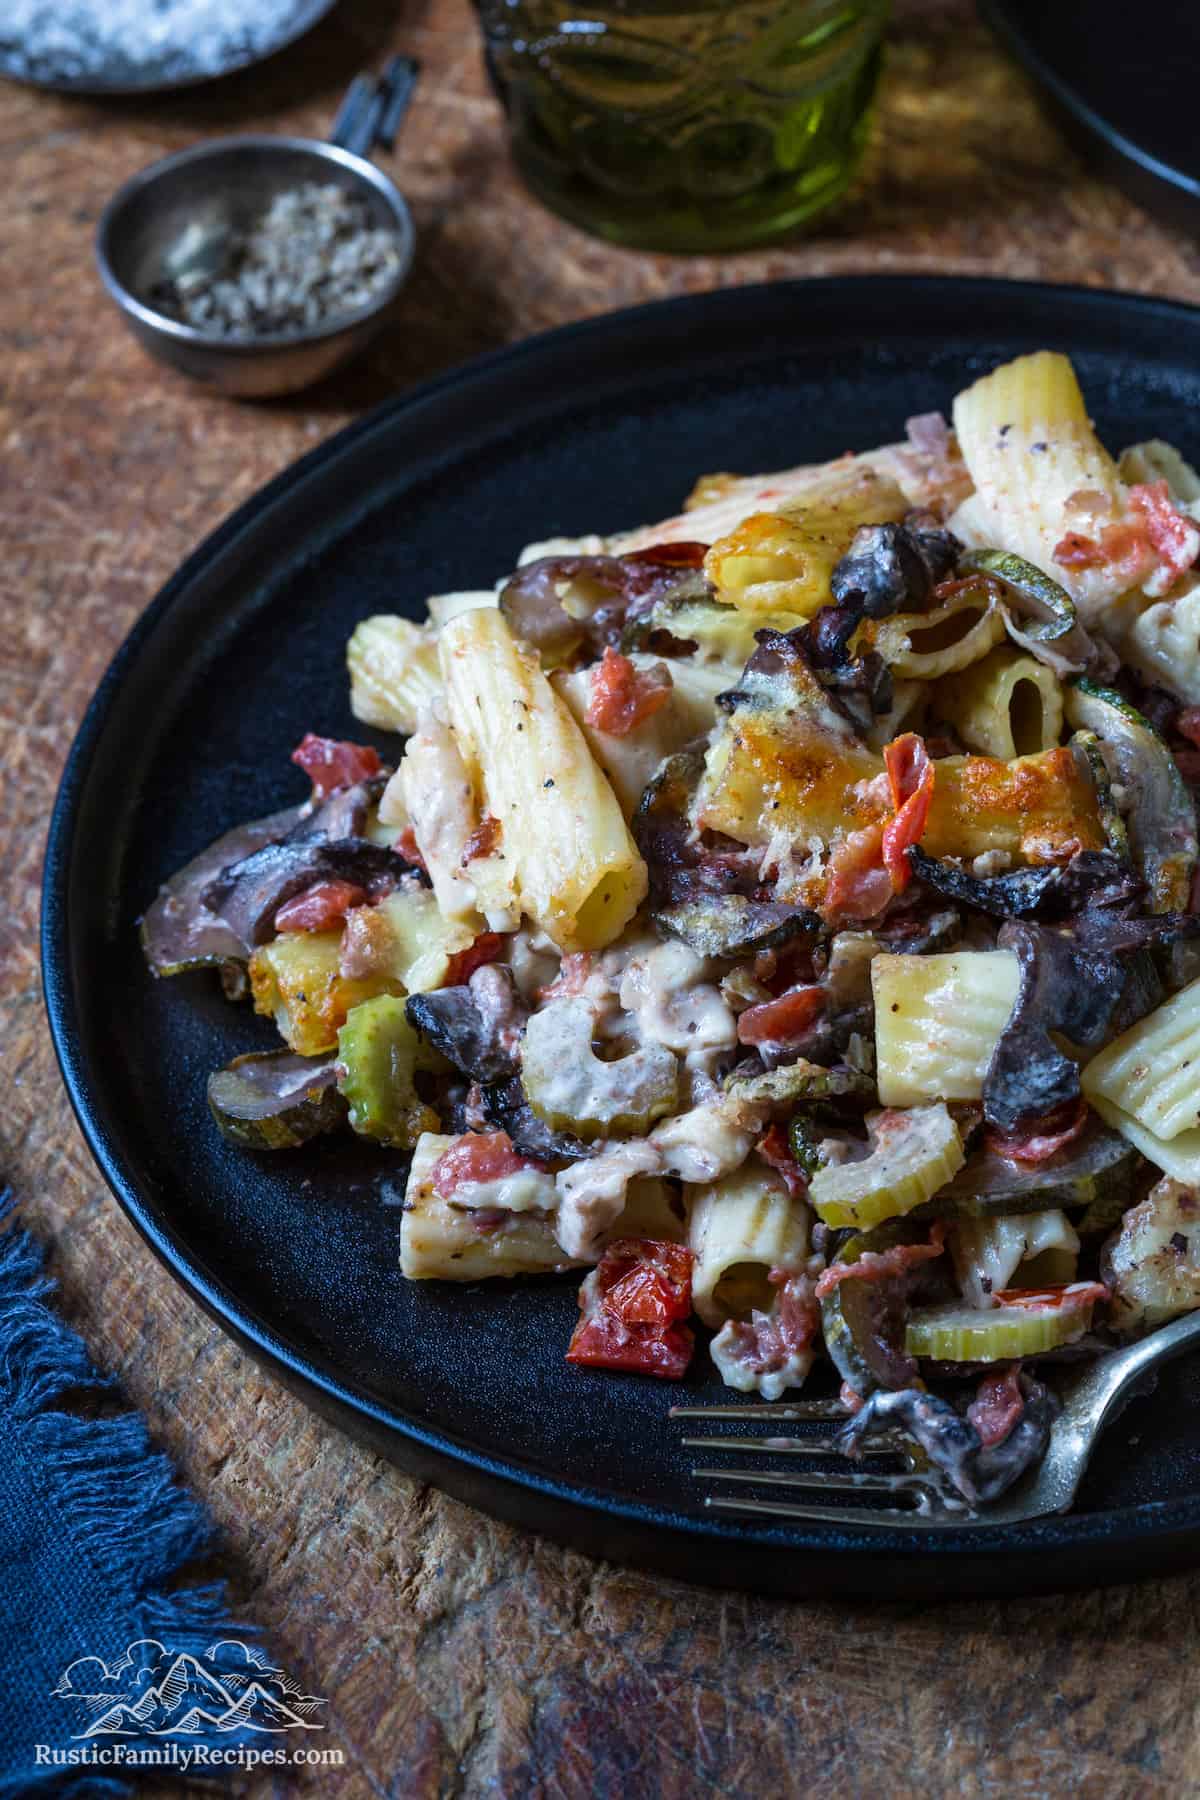 A plate with a generous serving of baked rigatoni pasta with veggies